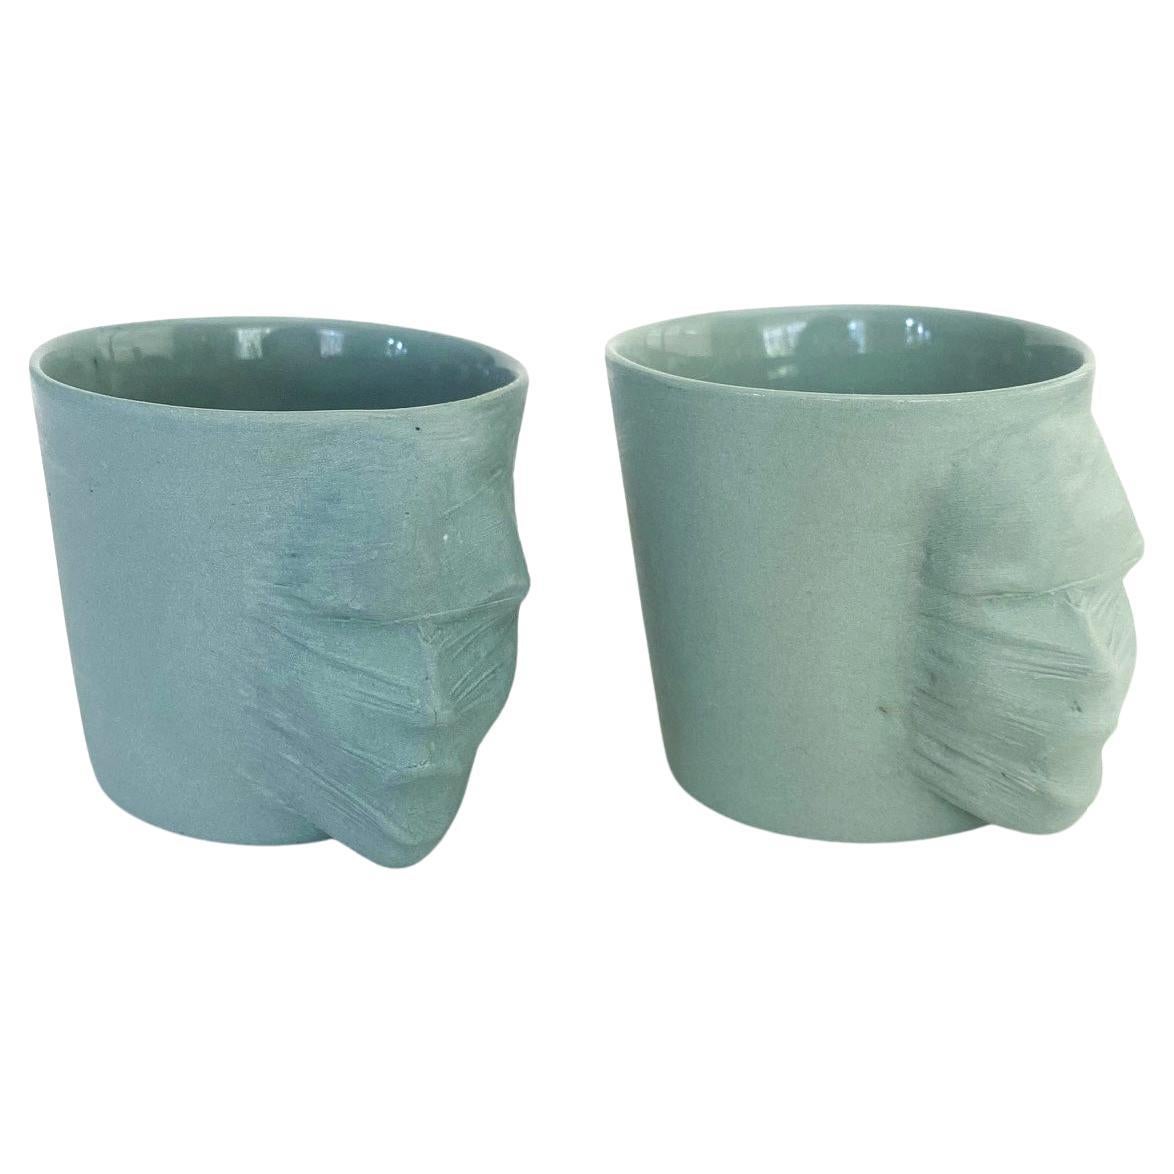 Modern Sculptural Porcelain Cups Set of 4 by Hulya Sozer, Face Silhouette, Blue Shades For Sale